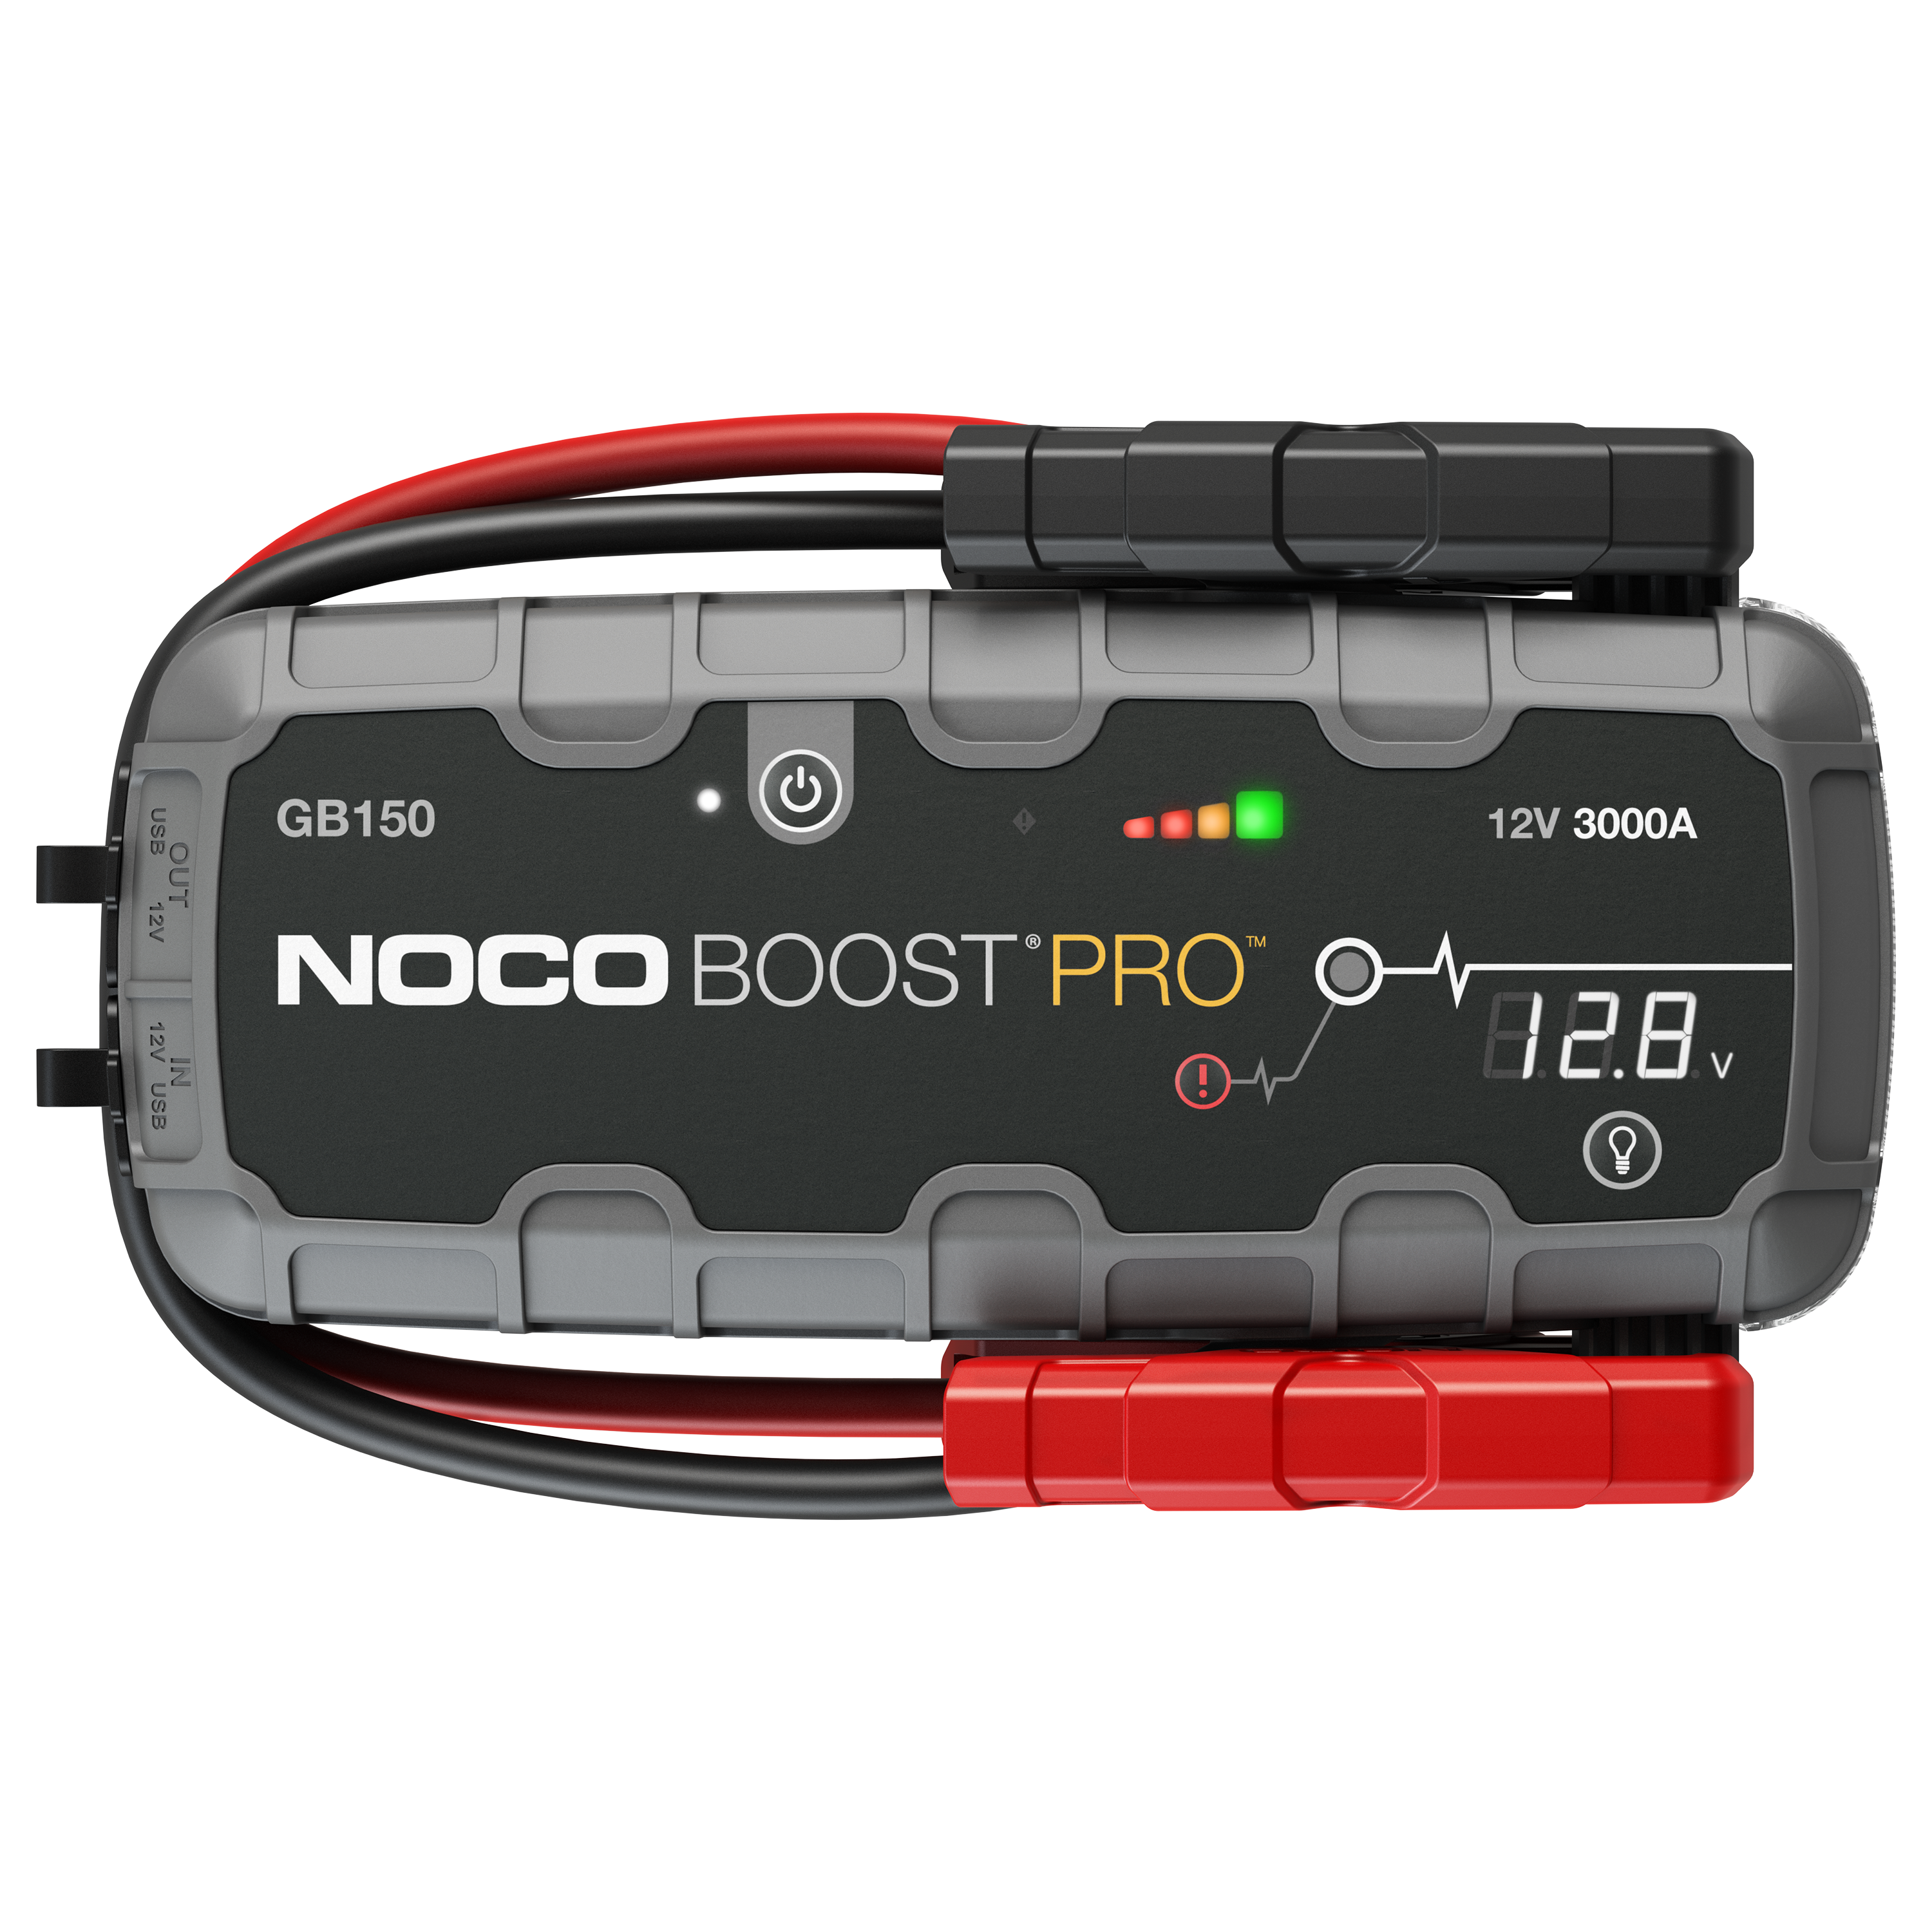 Noco Boost Pro GB150 booster jump starter starting aid power bank